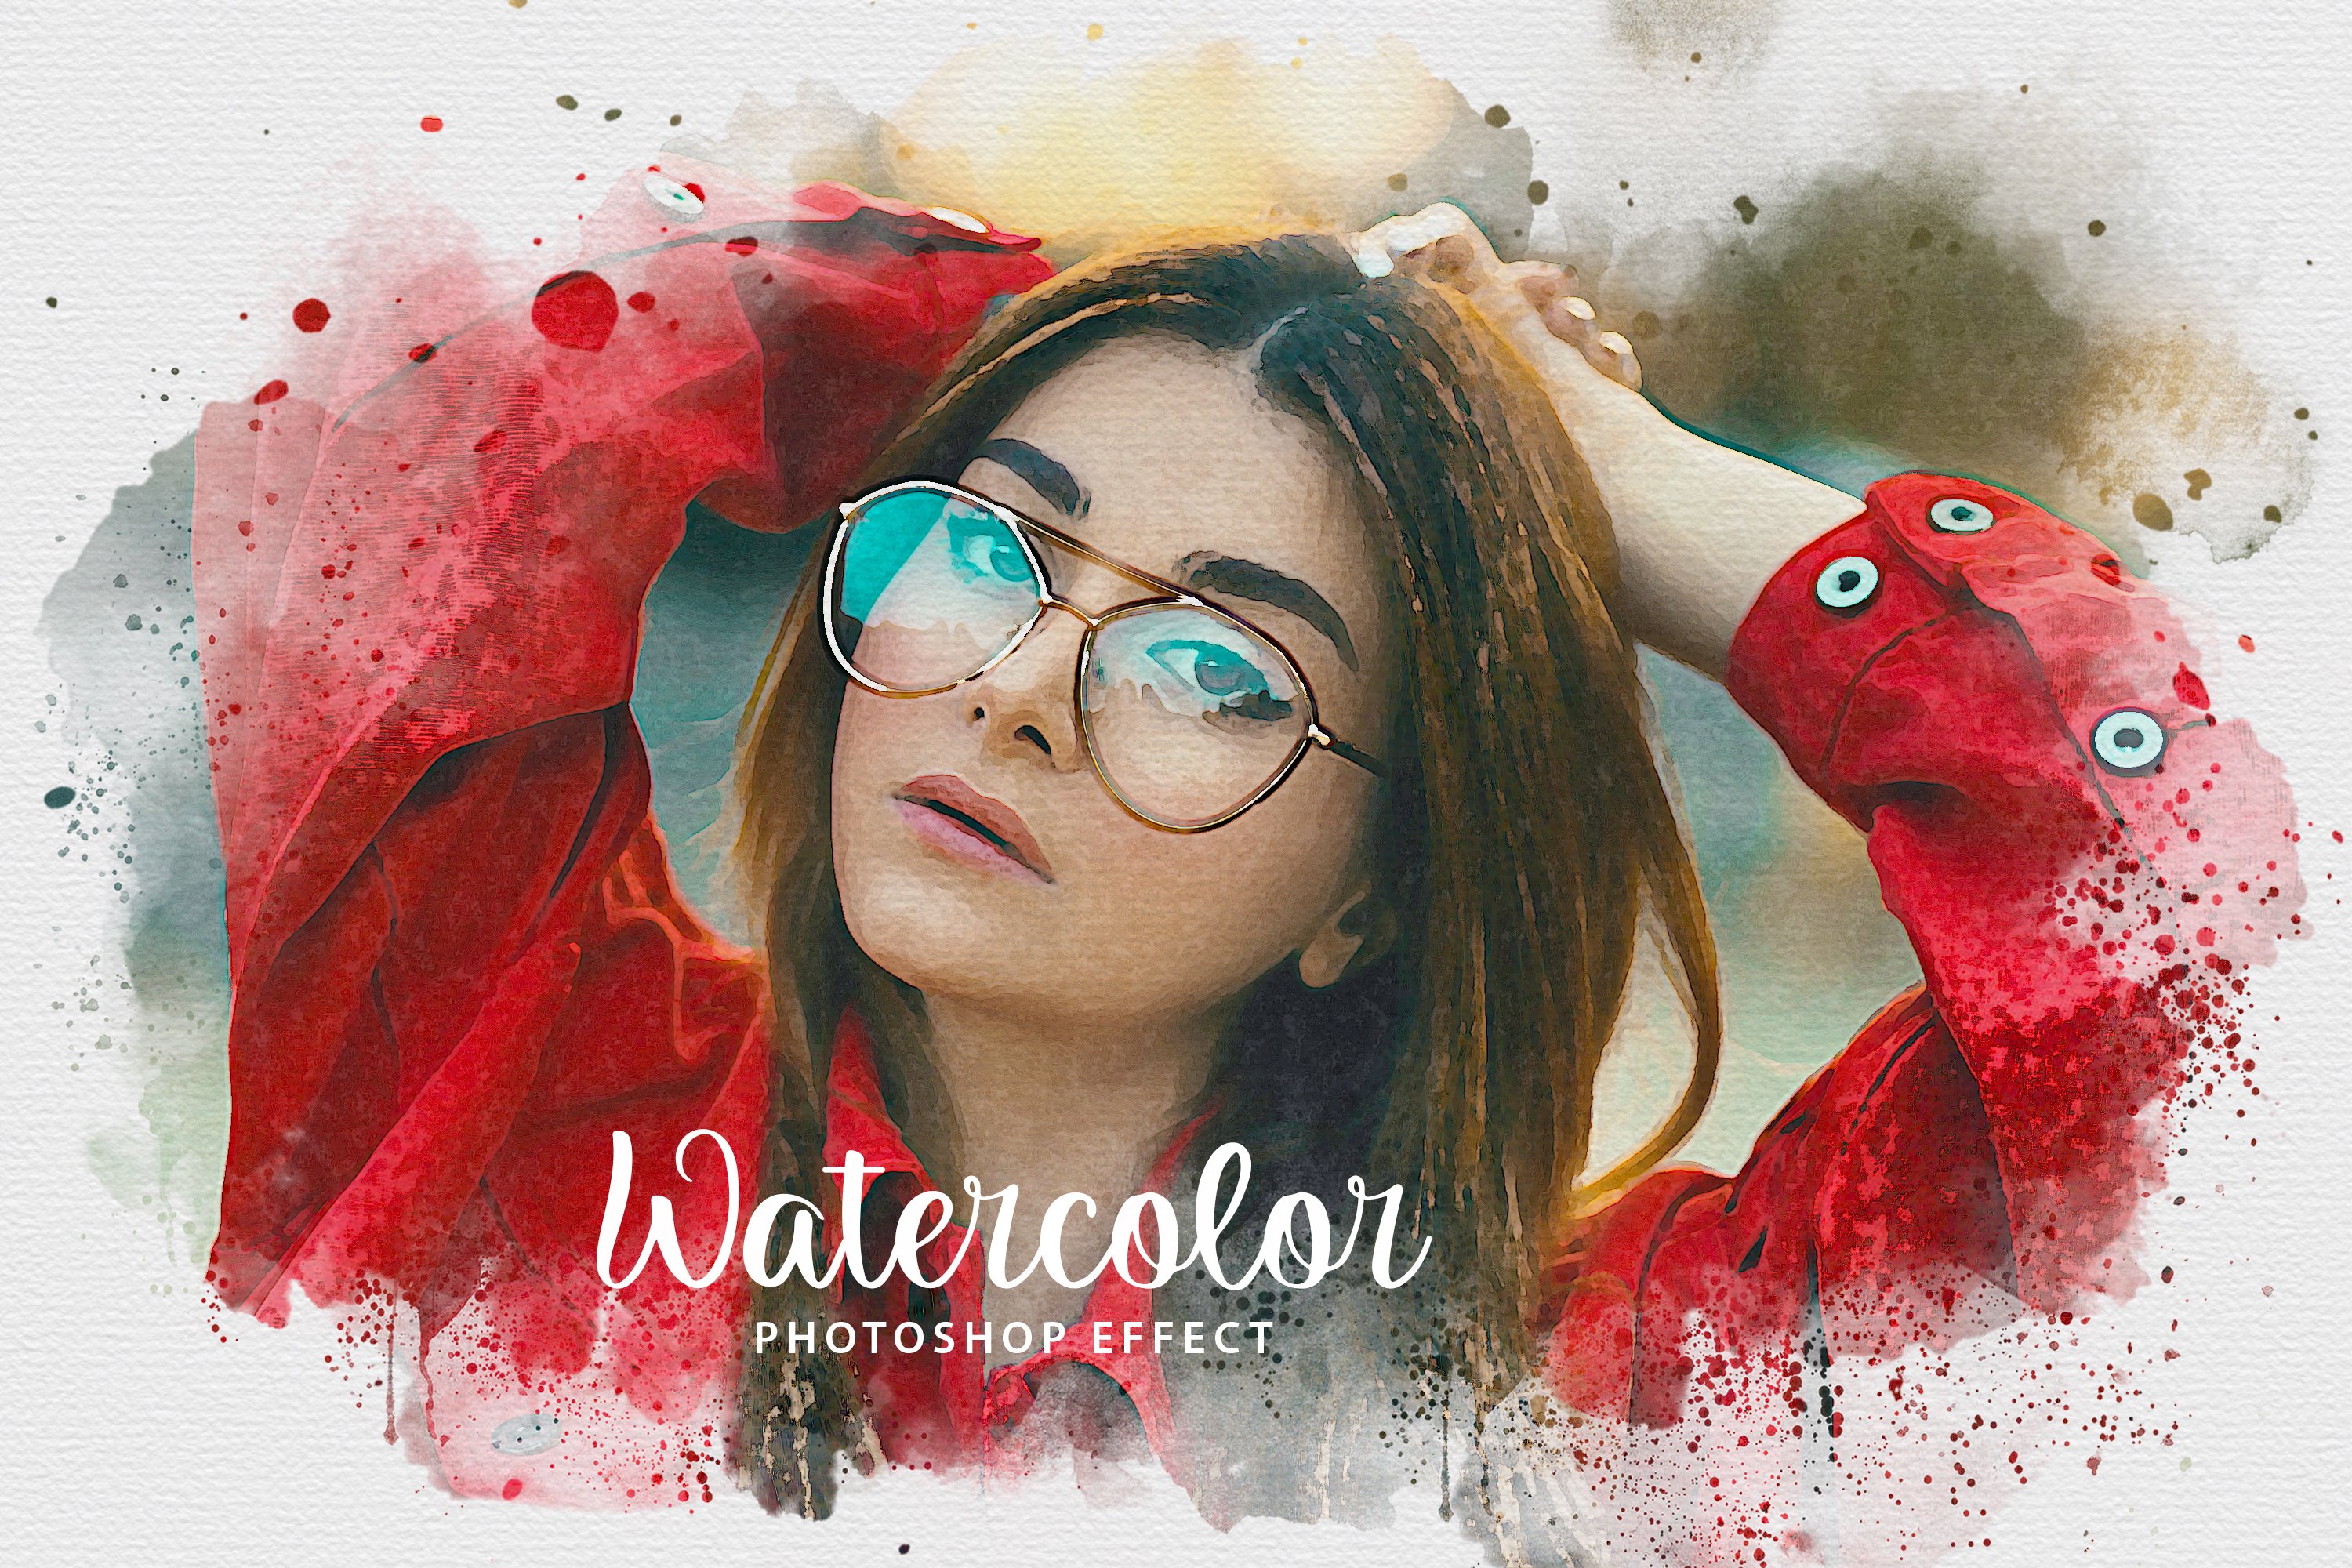 Realistic Watercolor Paint Effect cover image.